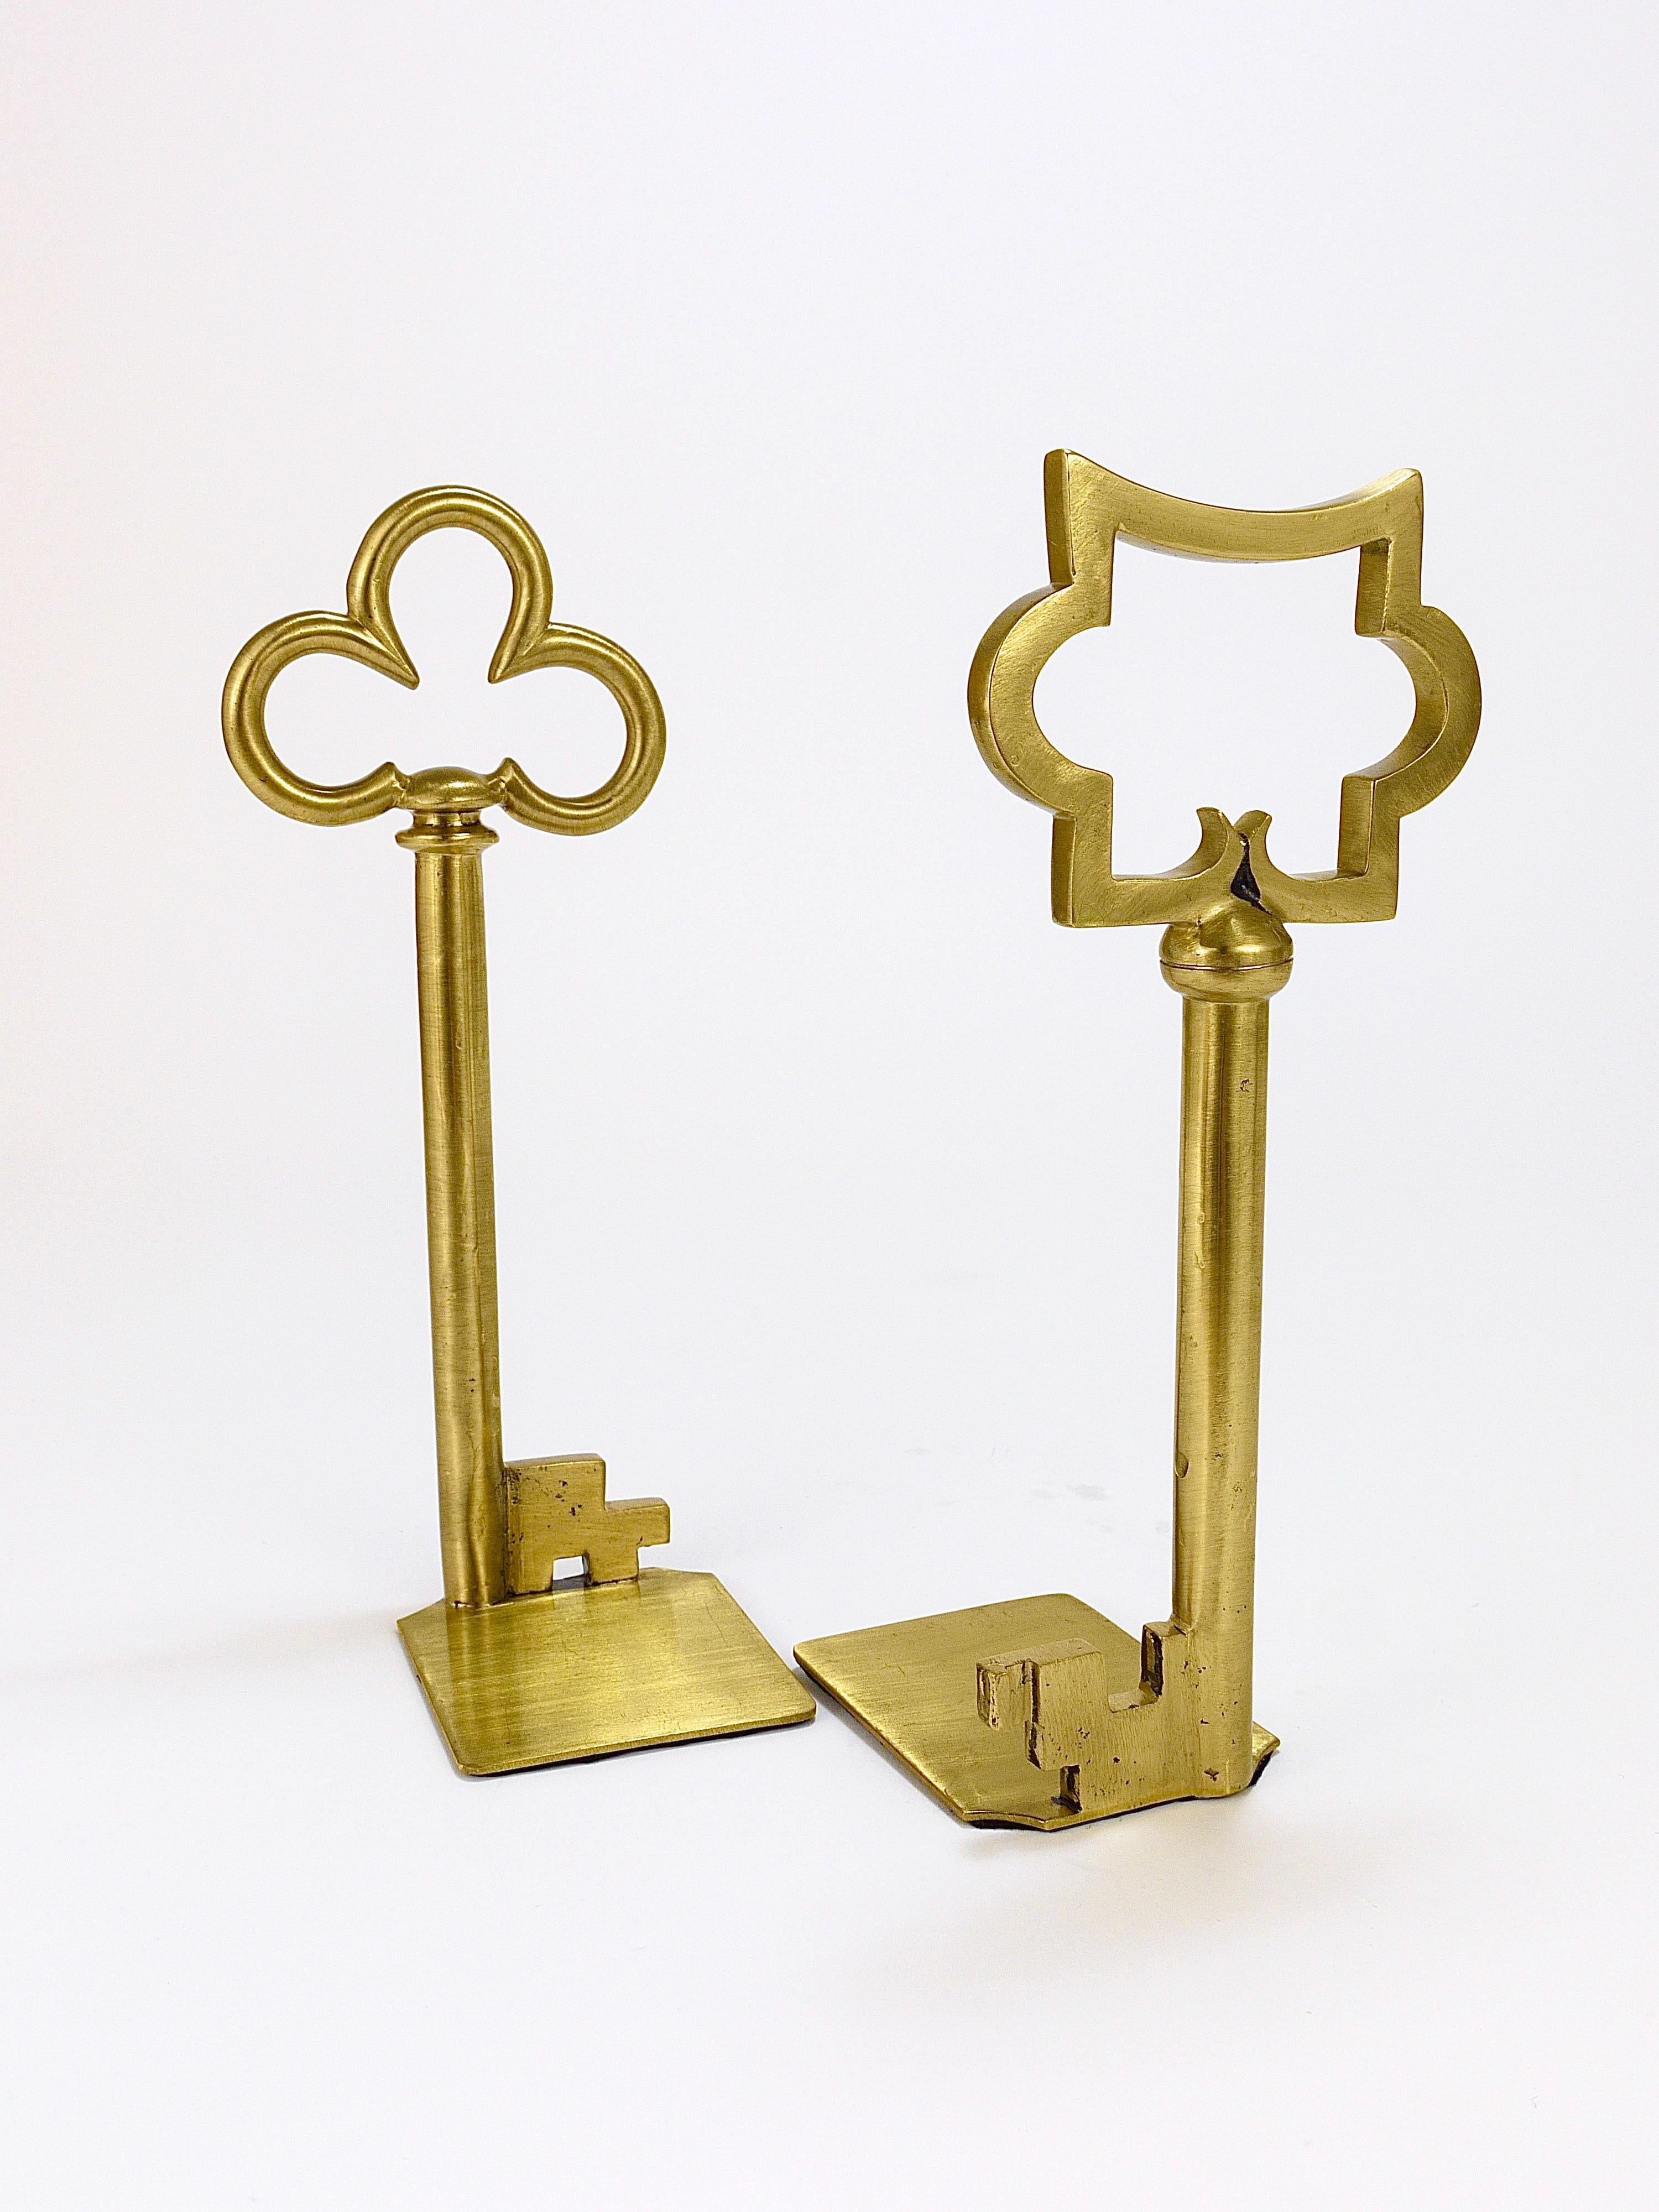 Sculptural Austrian Midcentury Brass Key Book Ends from the, 1950s For Sale 11